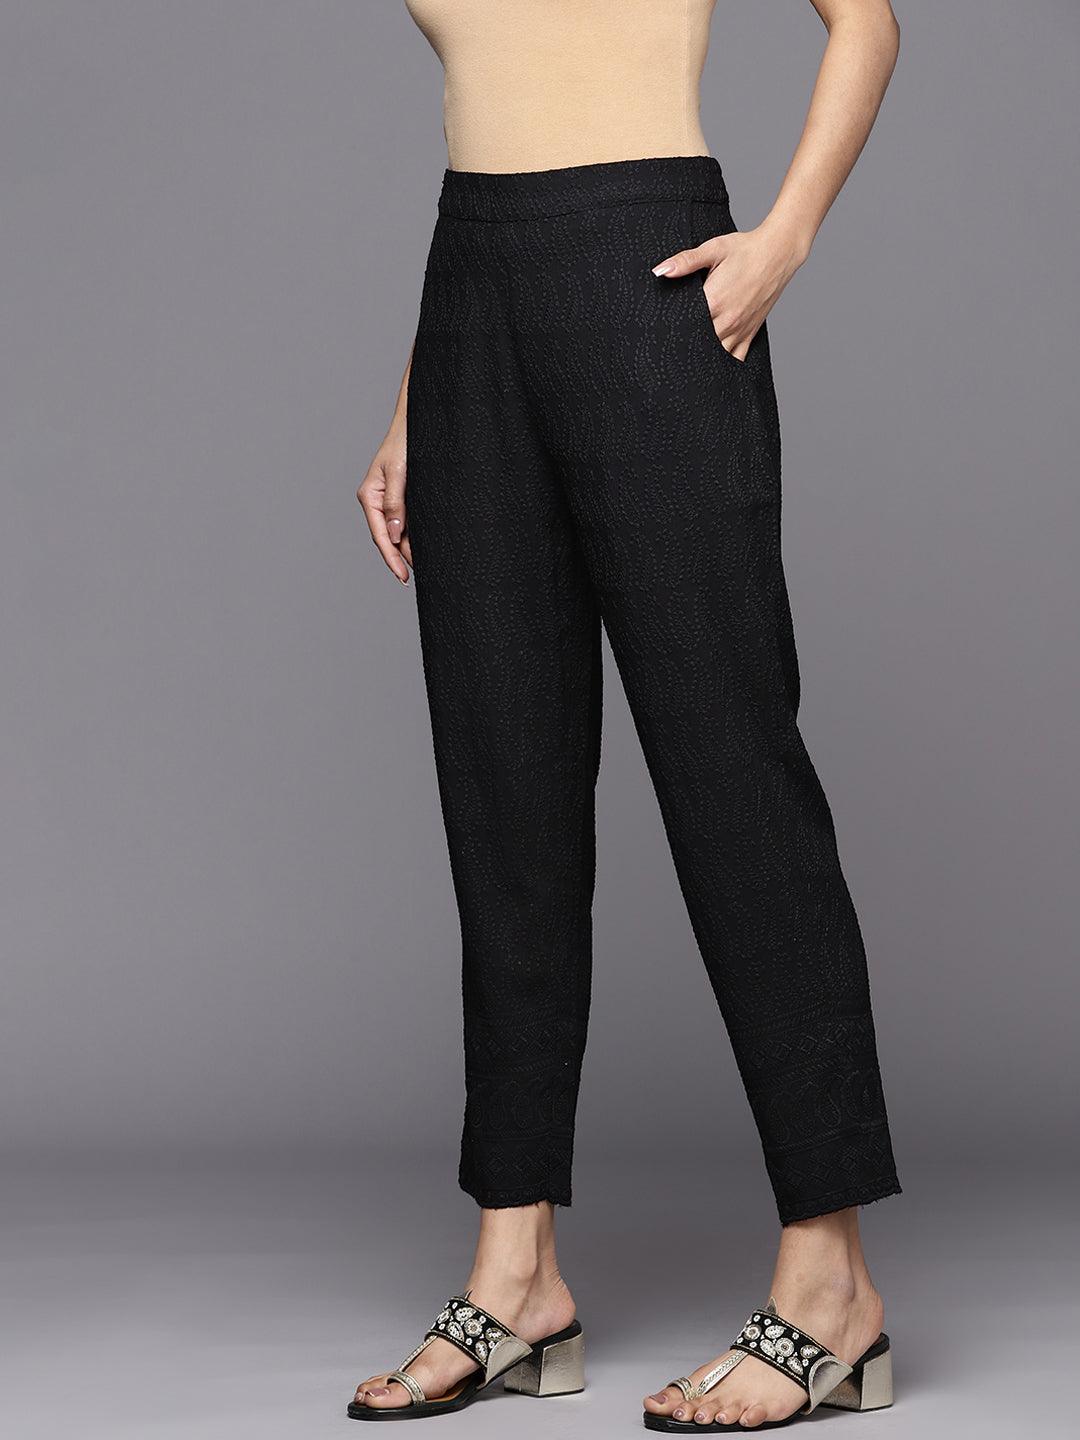 Black Embroidered Viscose Rayon Trousers